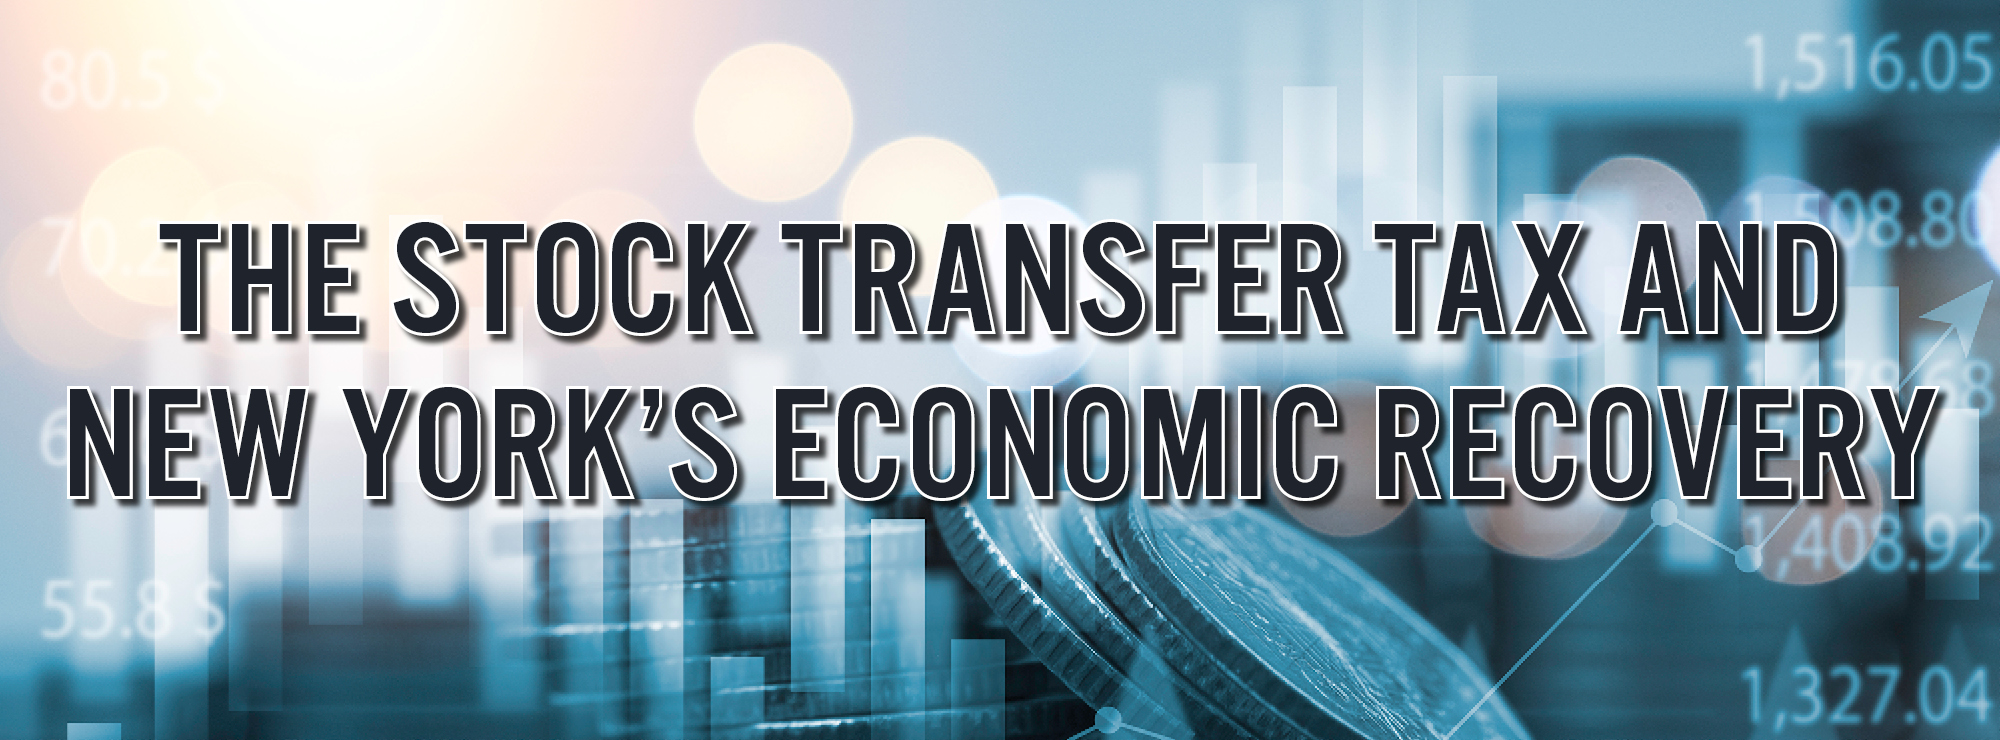 The Stock Transfer Tax and New York's Economic Recovery